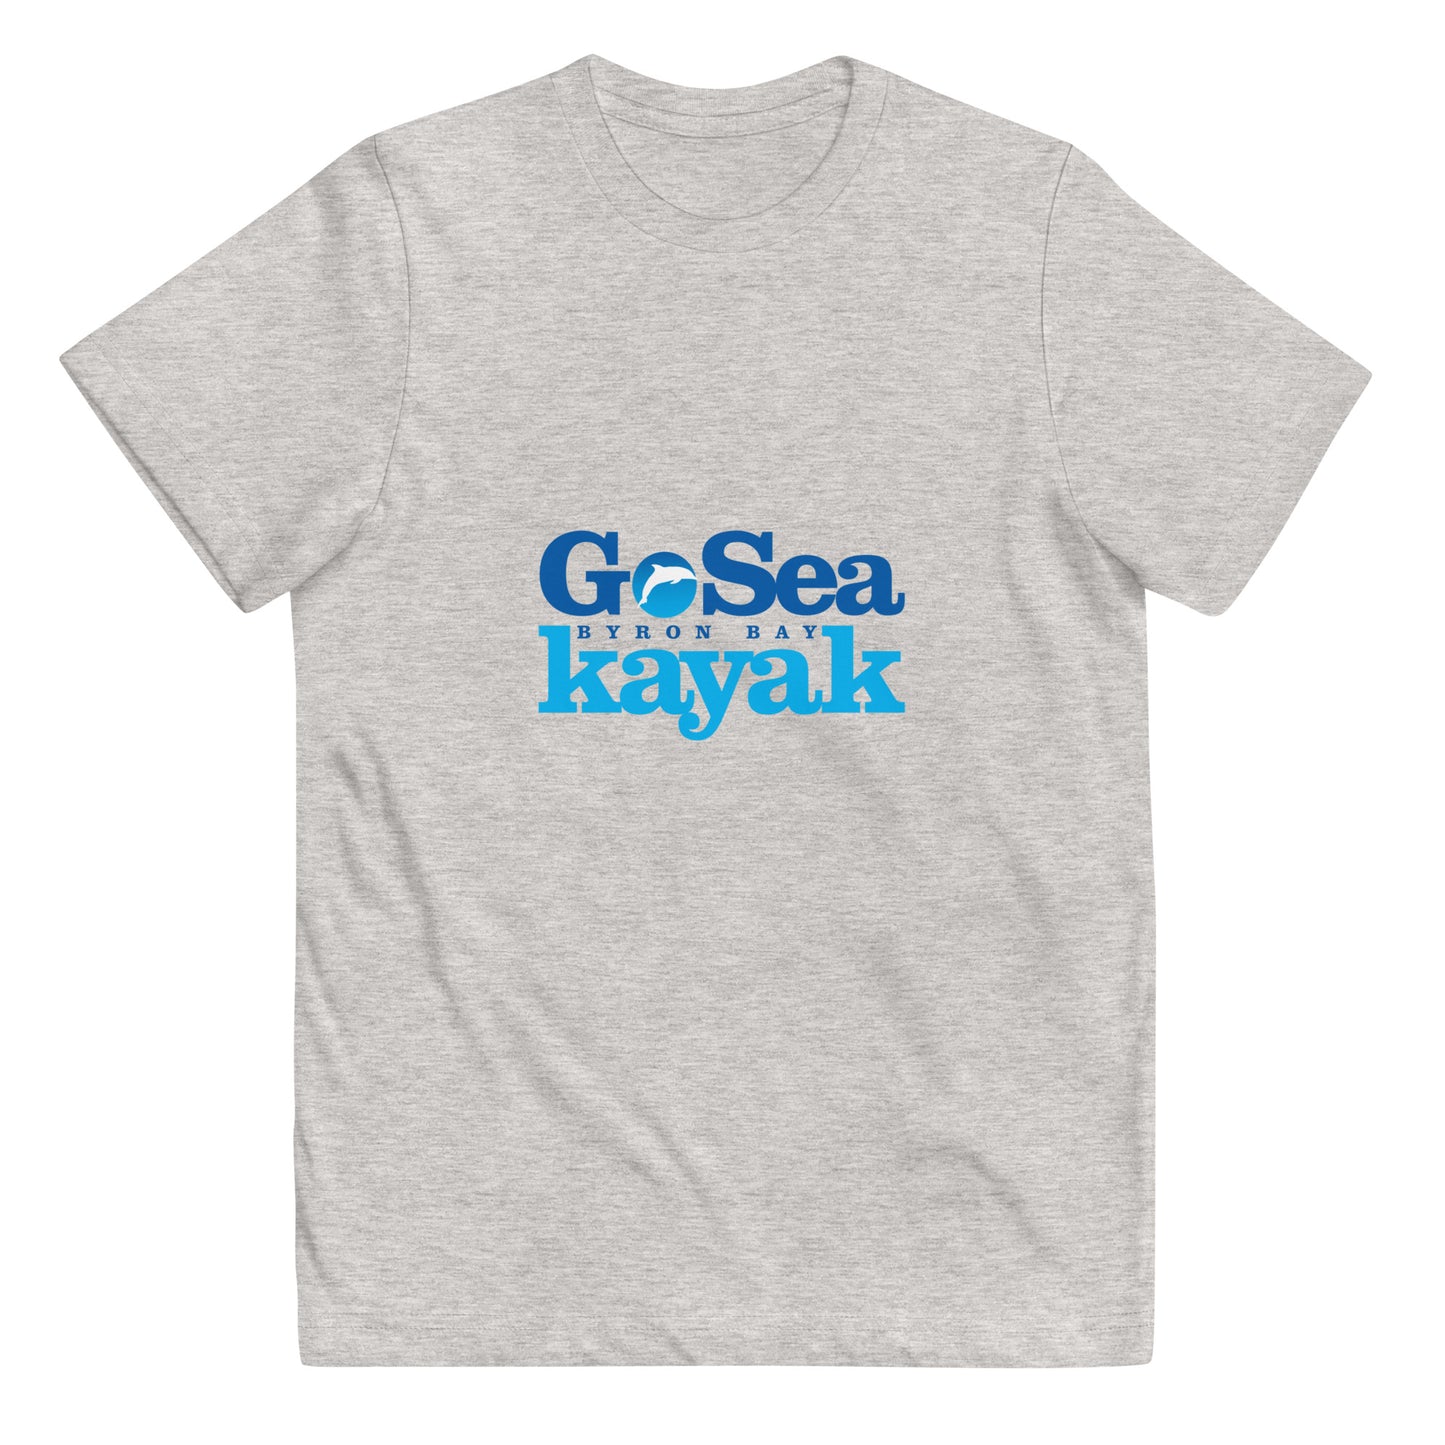  Kids T-Shirt - Natural / Heather colour - Front flat lay view - Go Sea Kayak Byron Bay logo on front - Genuine Byron Bay Merchandise | Produced by Go Sea Kayak Byron Bay 